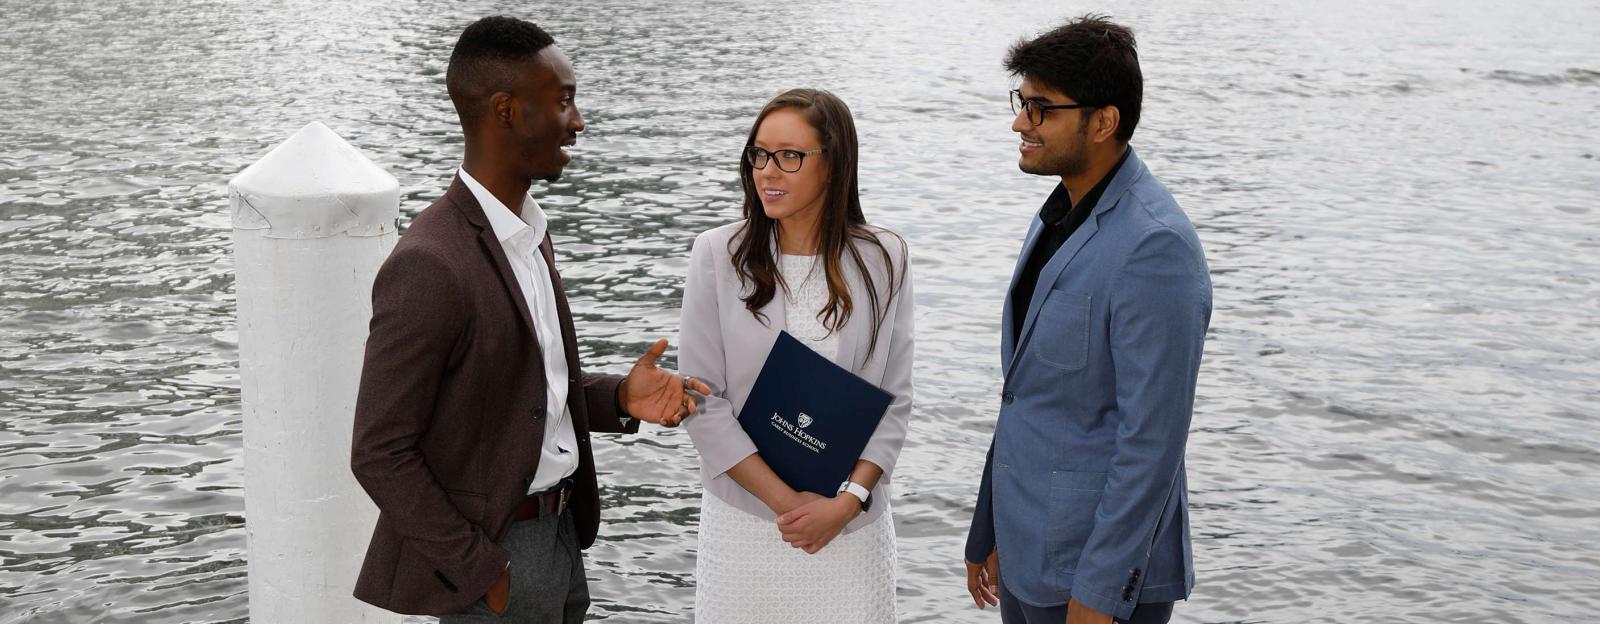 3 students near the water networking and holding a JHU Carey folder